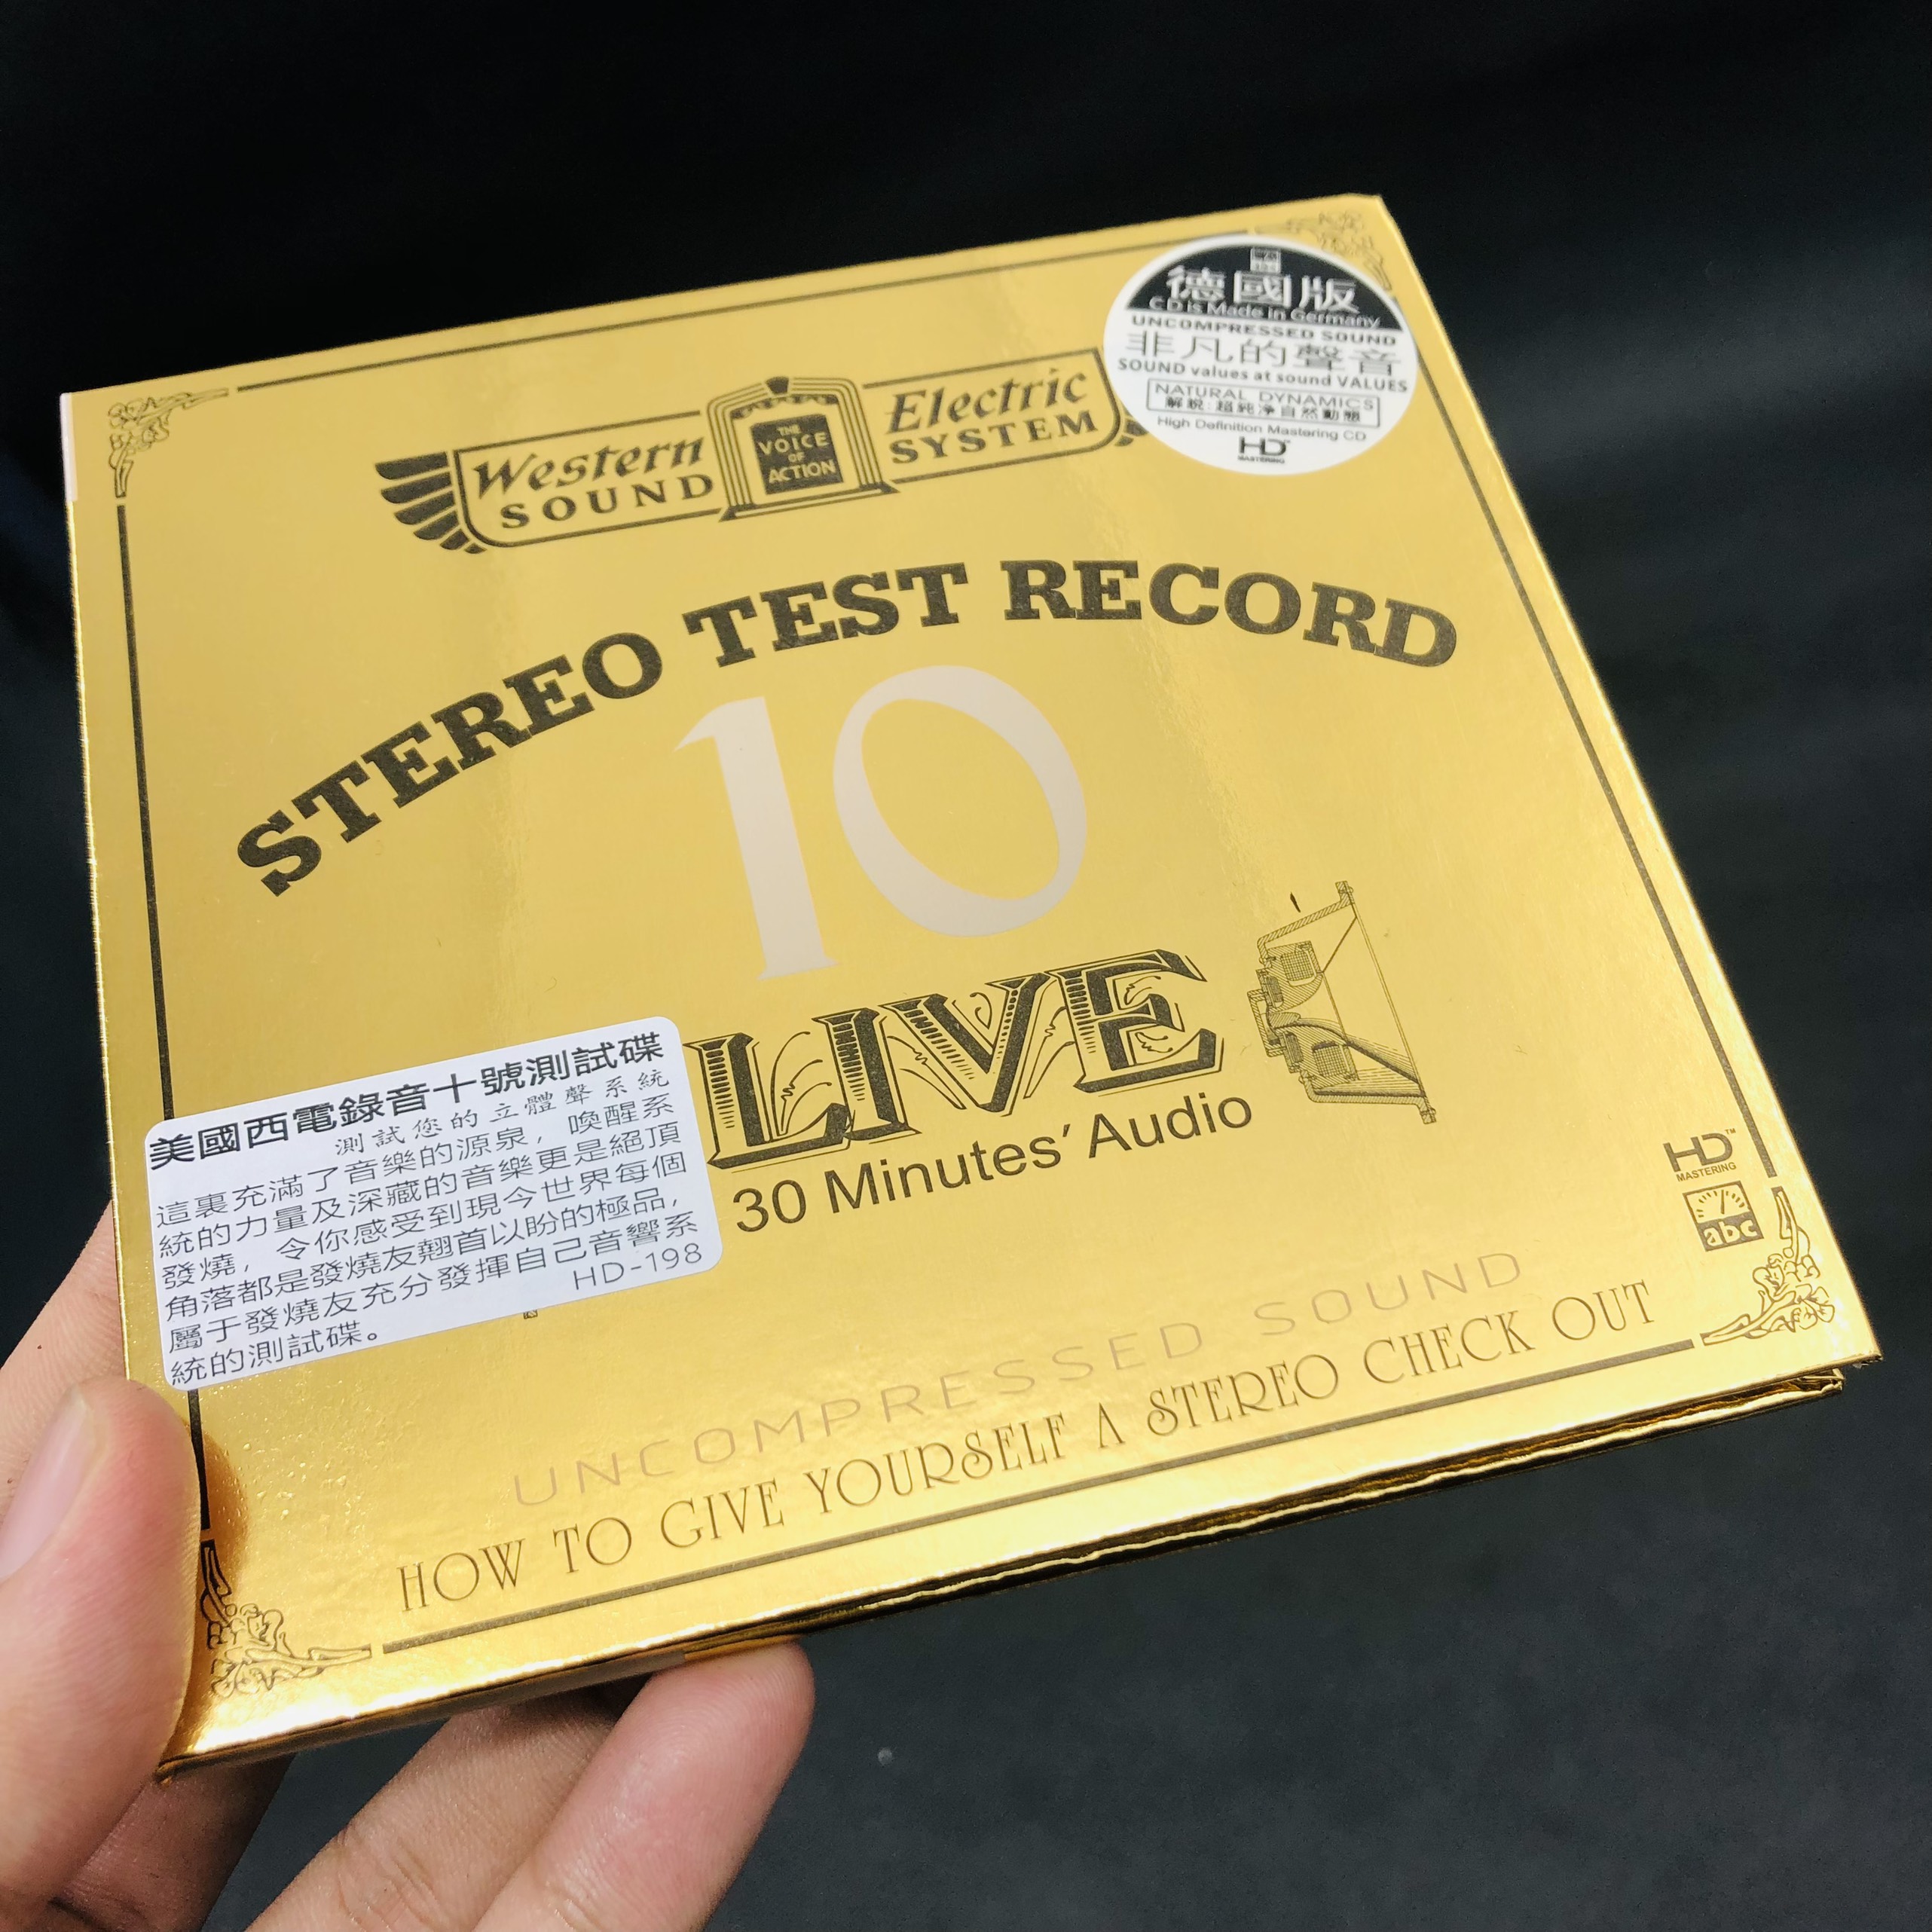 Stereo Test Record - 10 LIVE